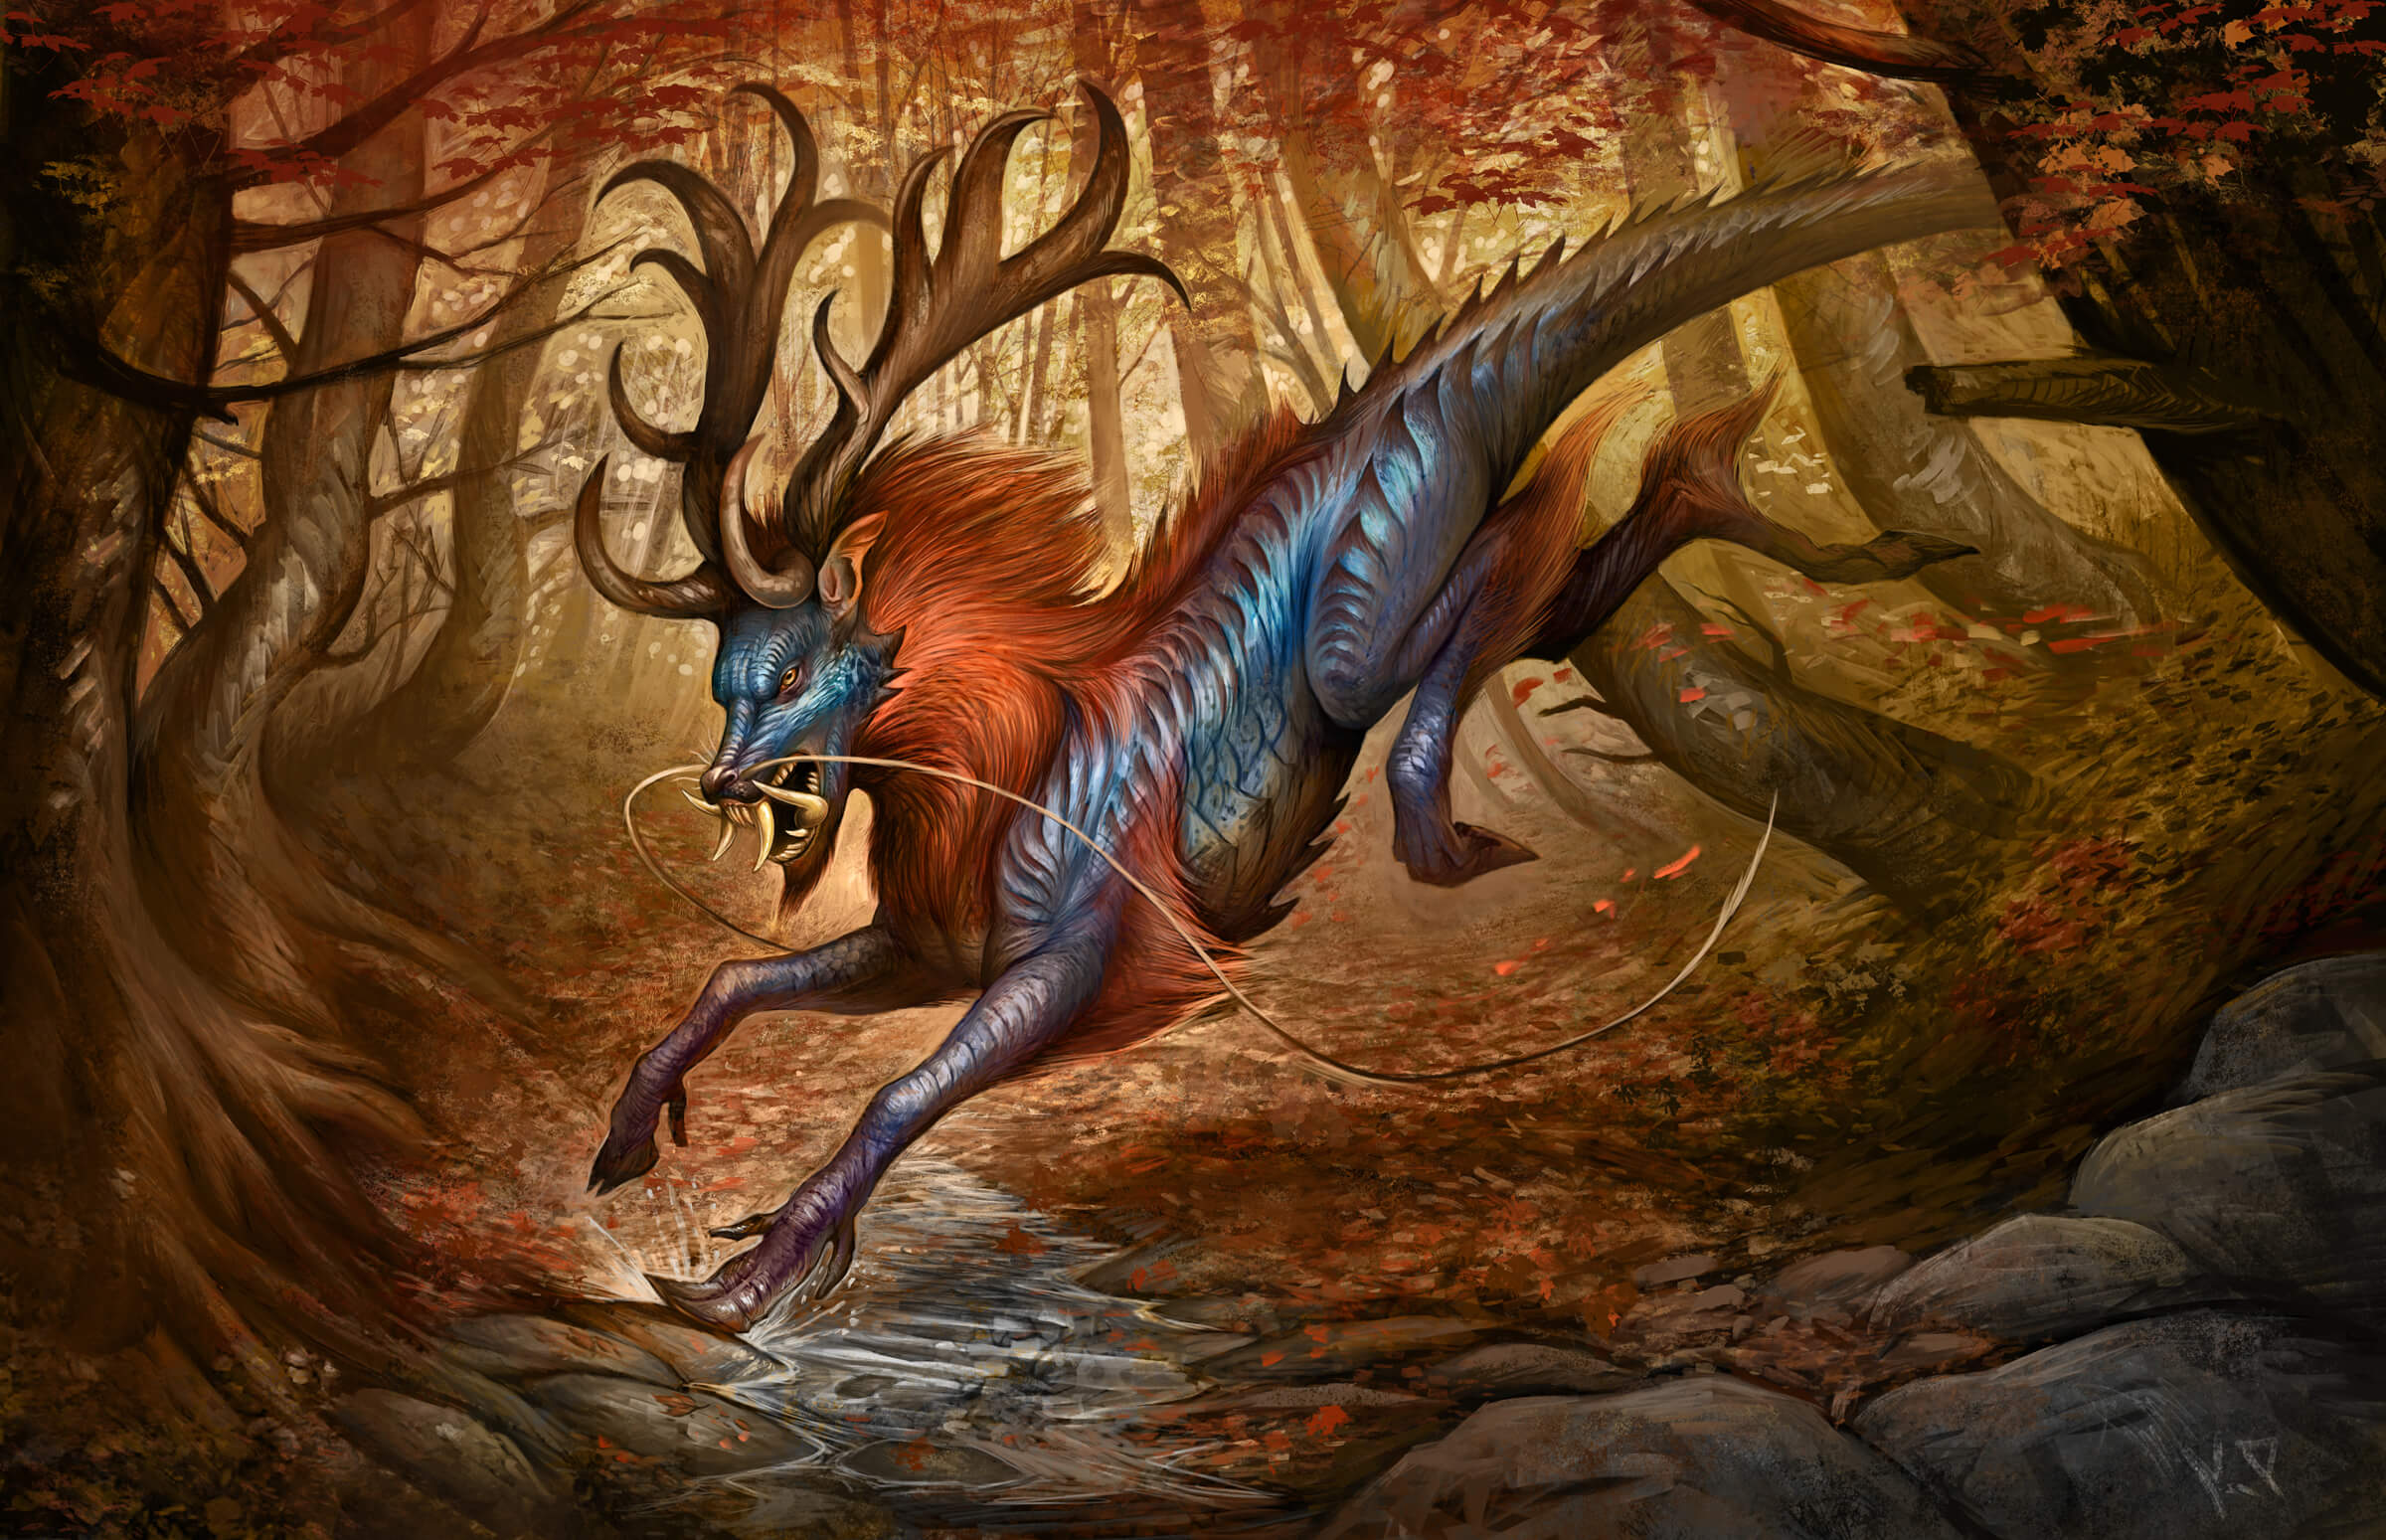 digital painting of a creature with lizard-like skin, a lion's mane, and giant antlers, running through an autumnal forest